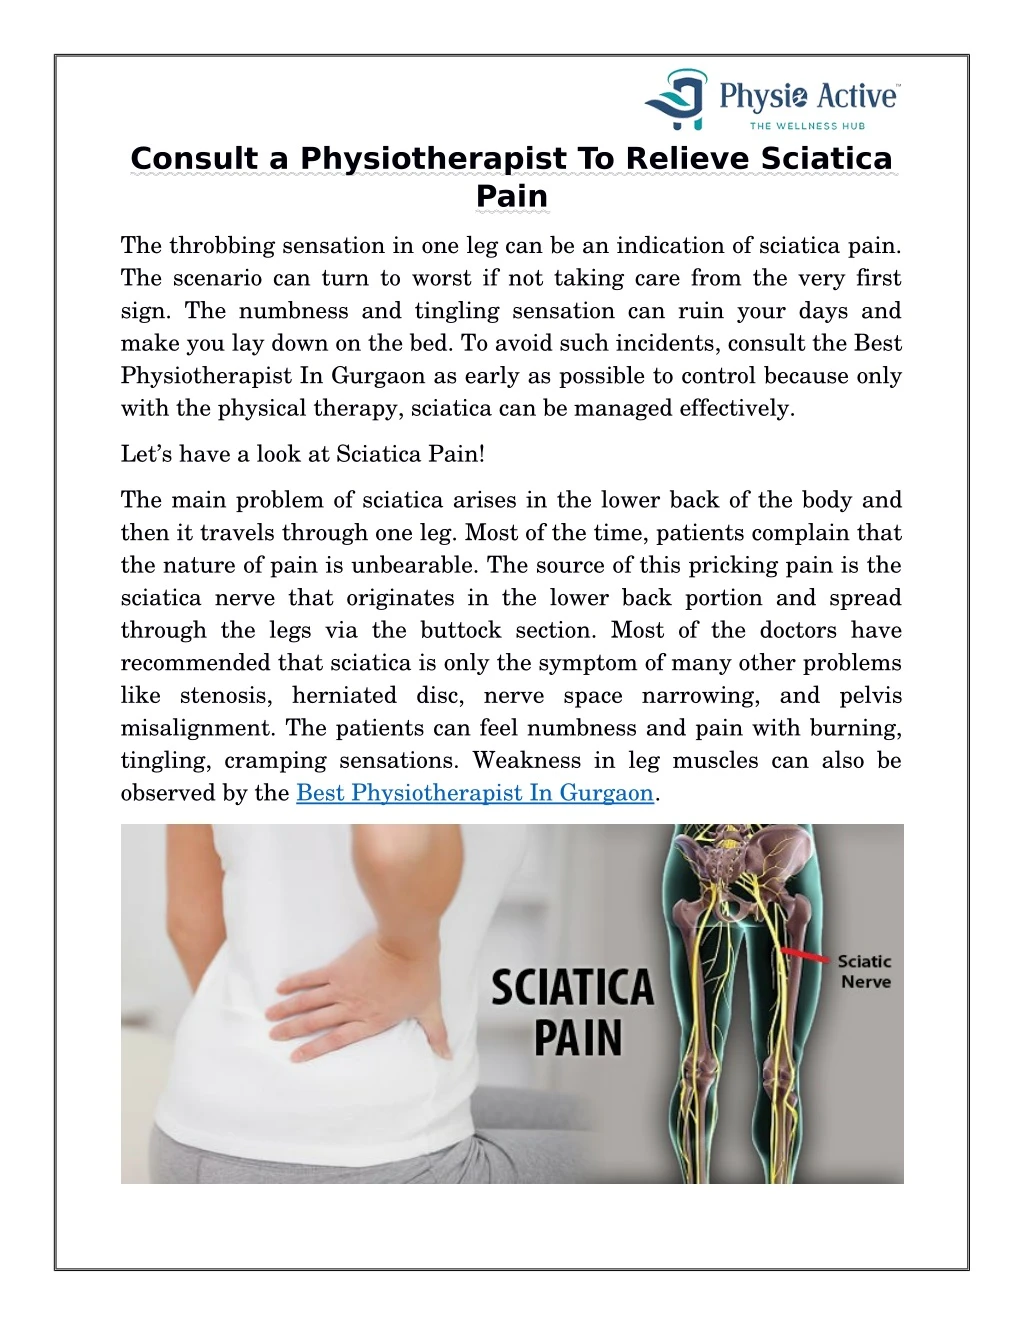 consult a physiotherapist to relieve sciatica pain